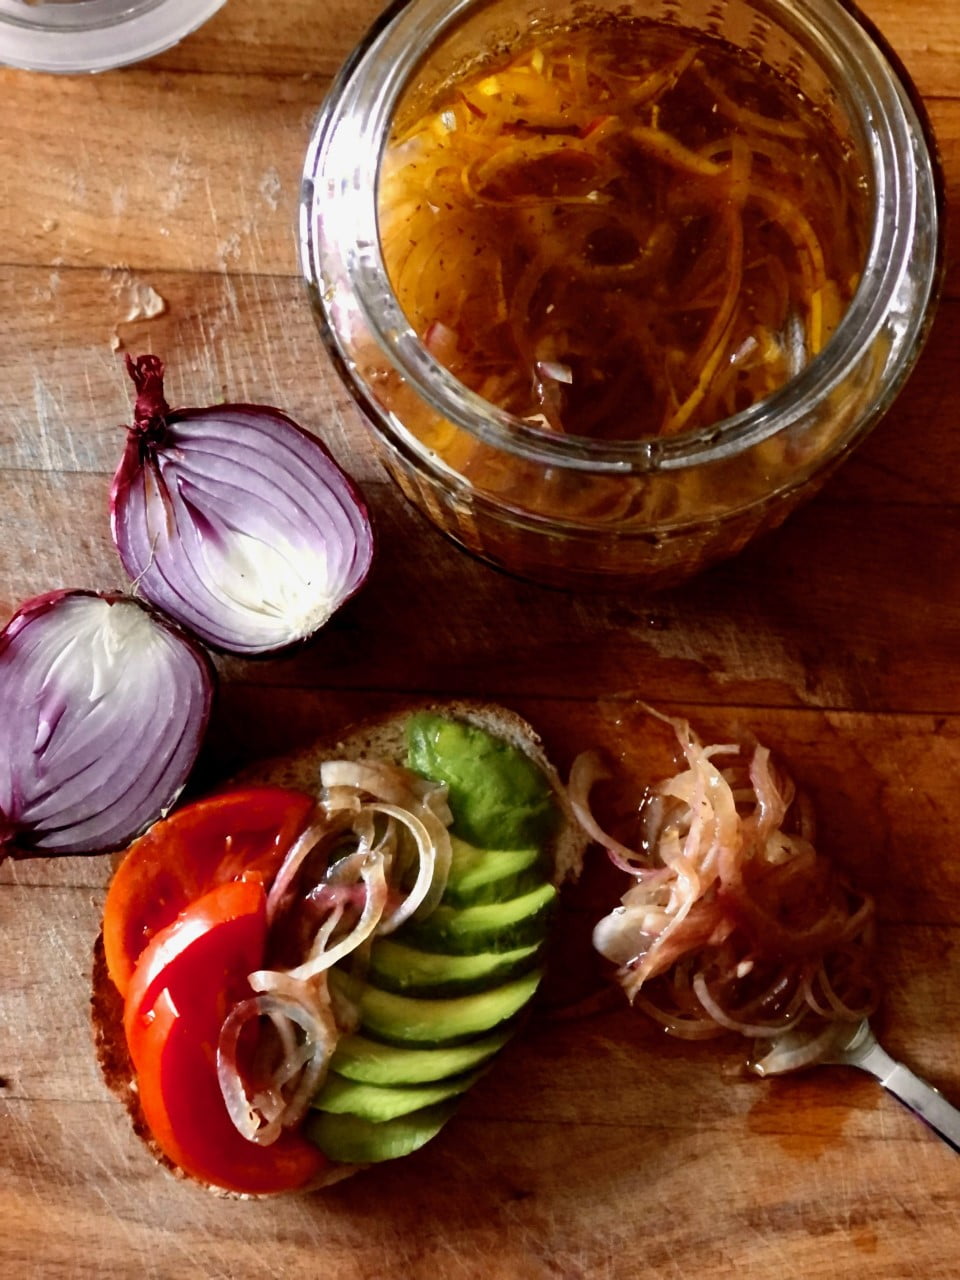 Two Ways to Have Pickled/Marinated Onions